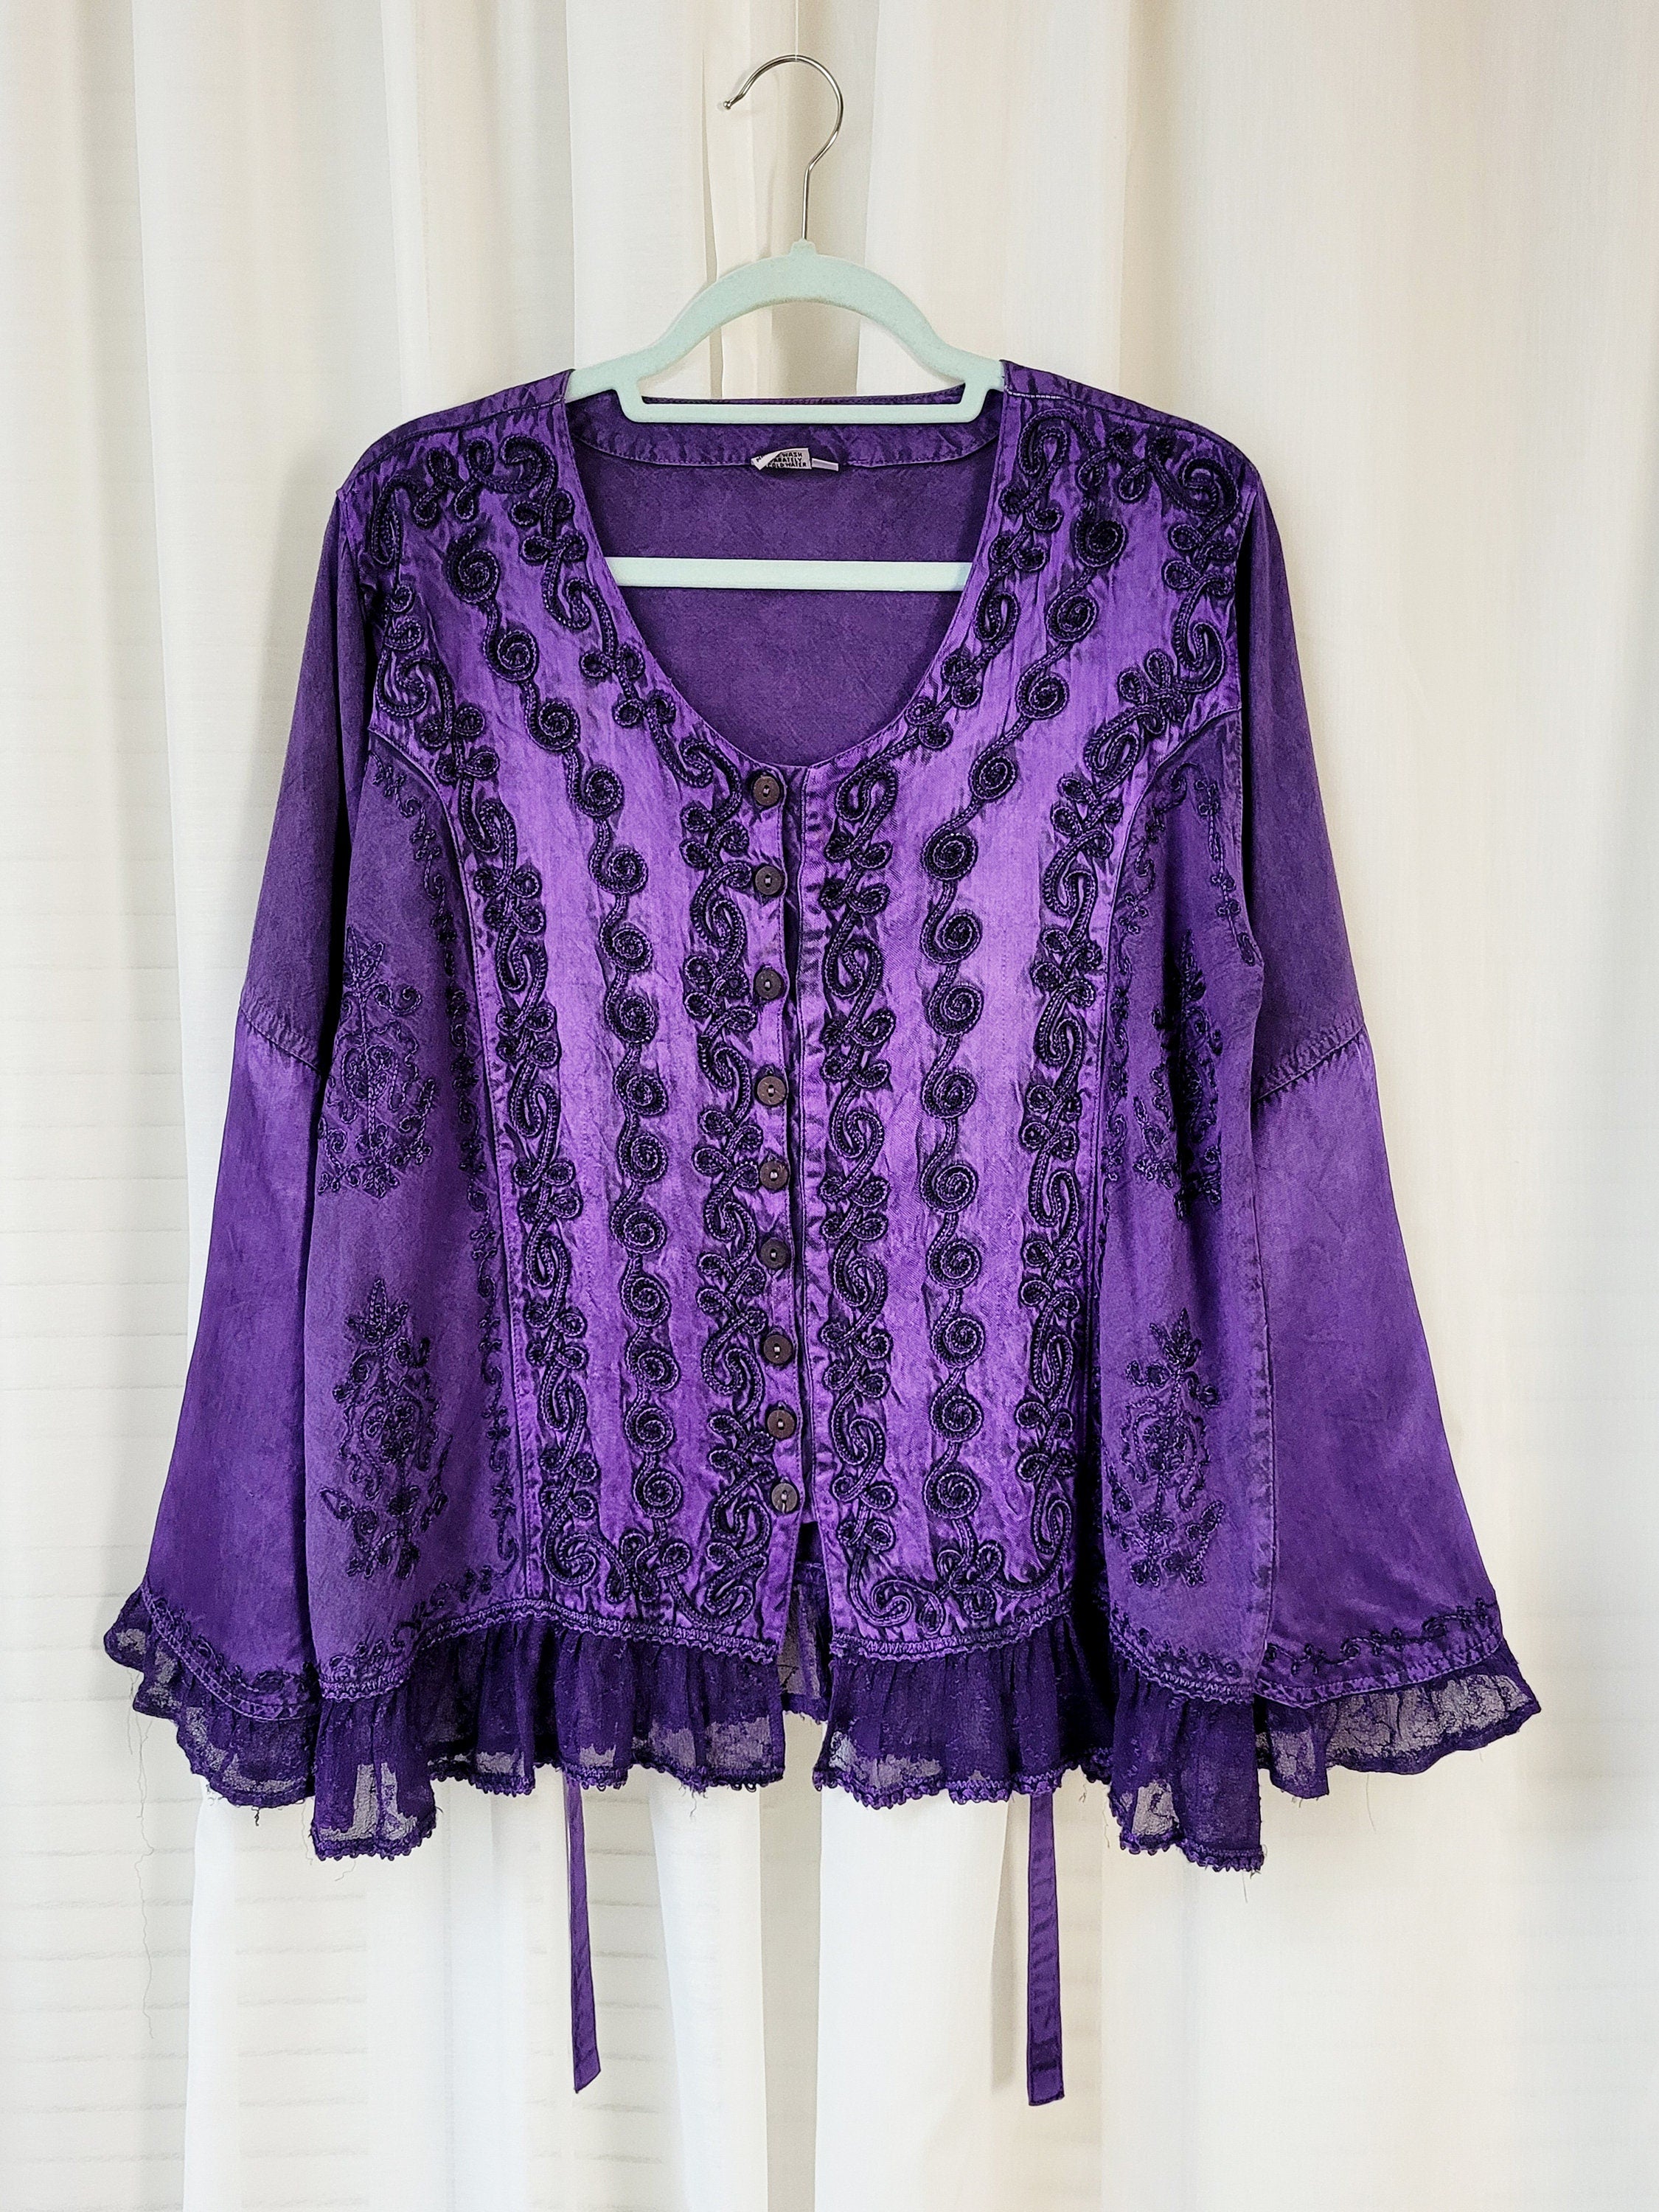 Vintage 90s purple embroidered flare sleeve blouse top